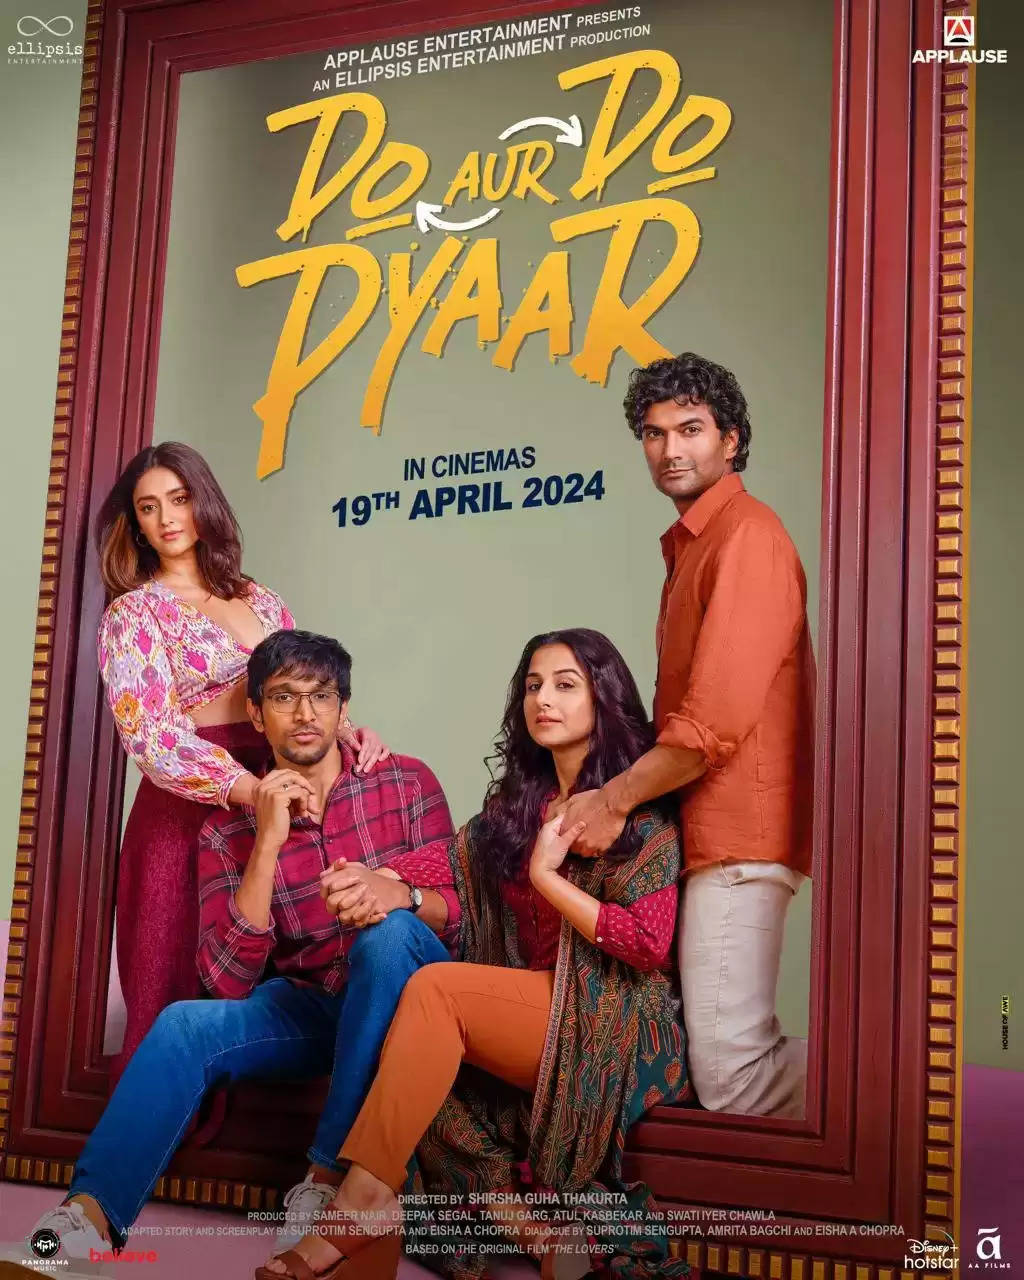 The makers of this summer's hottest romance, 'Do Aur Do Pyaar' unveiled a sizzling new poster announcing its release date April 19, 2024, stirring excitement among eager audiences.